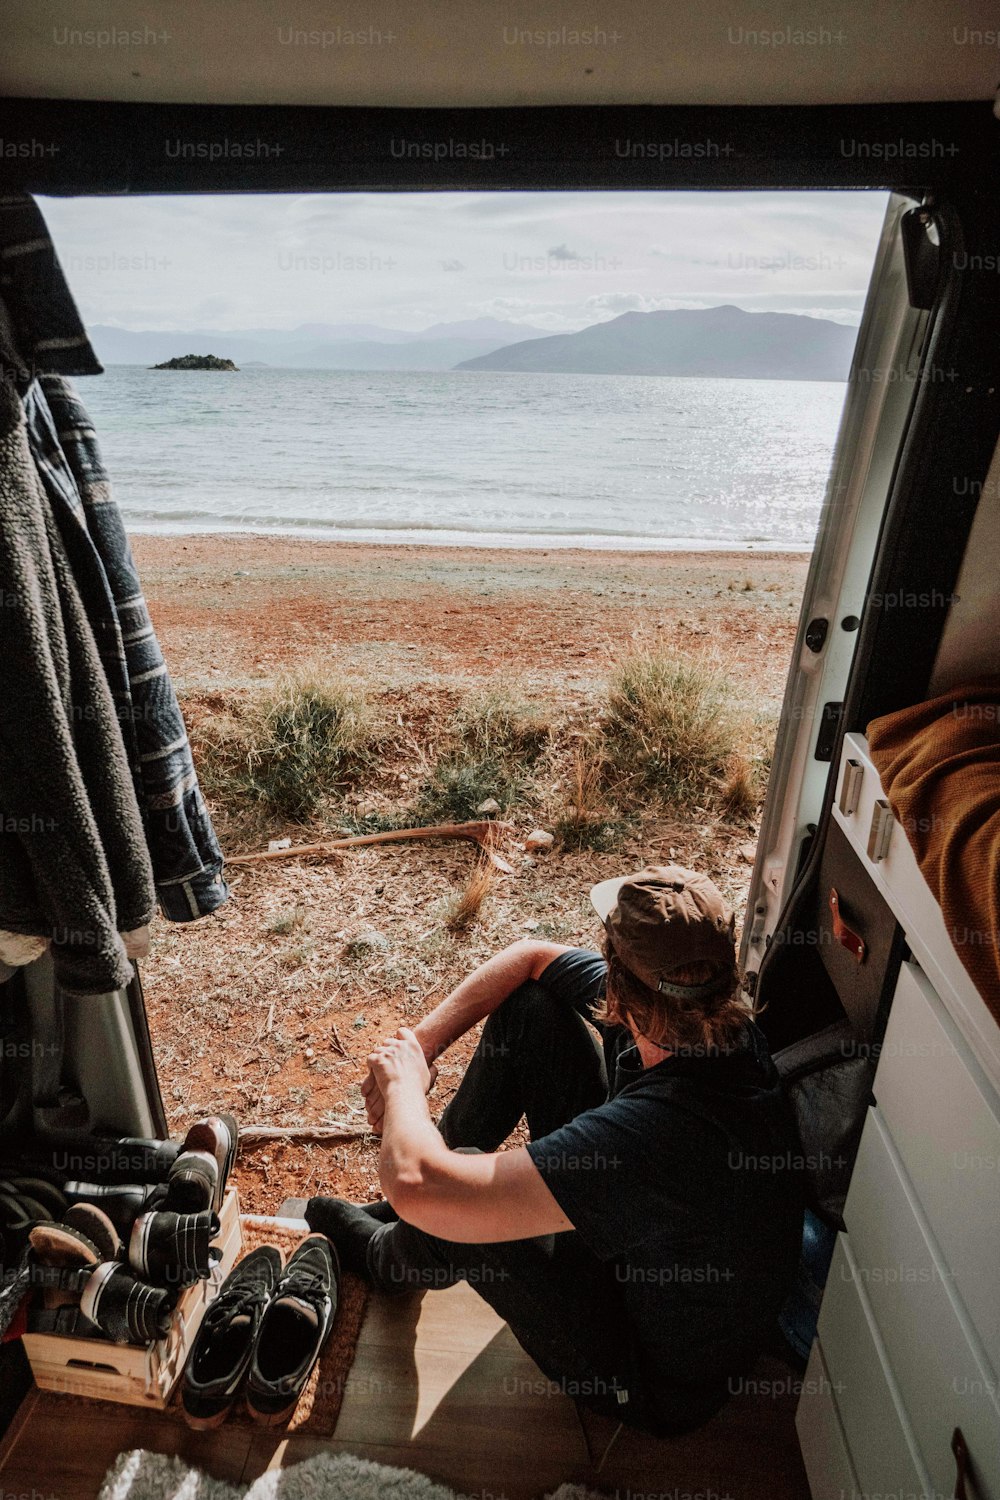 a person sitting in a van looking out the window